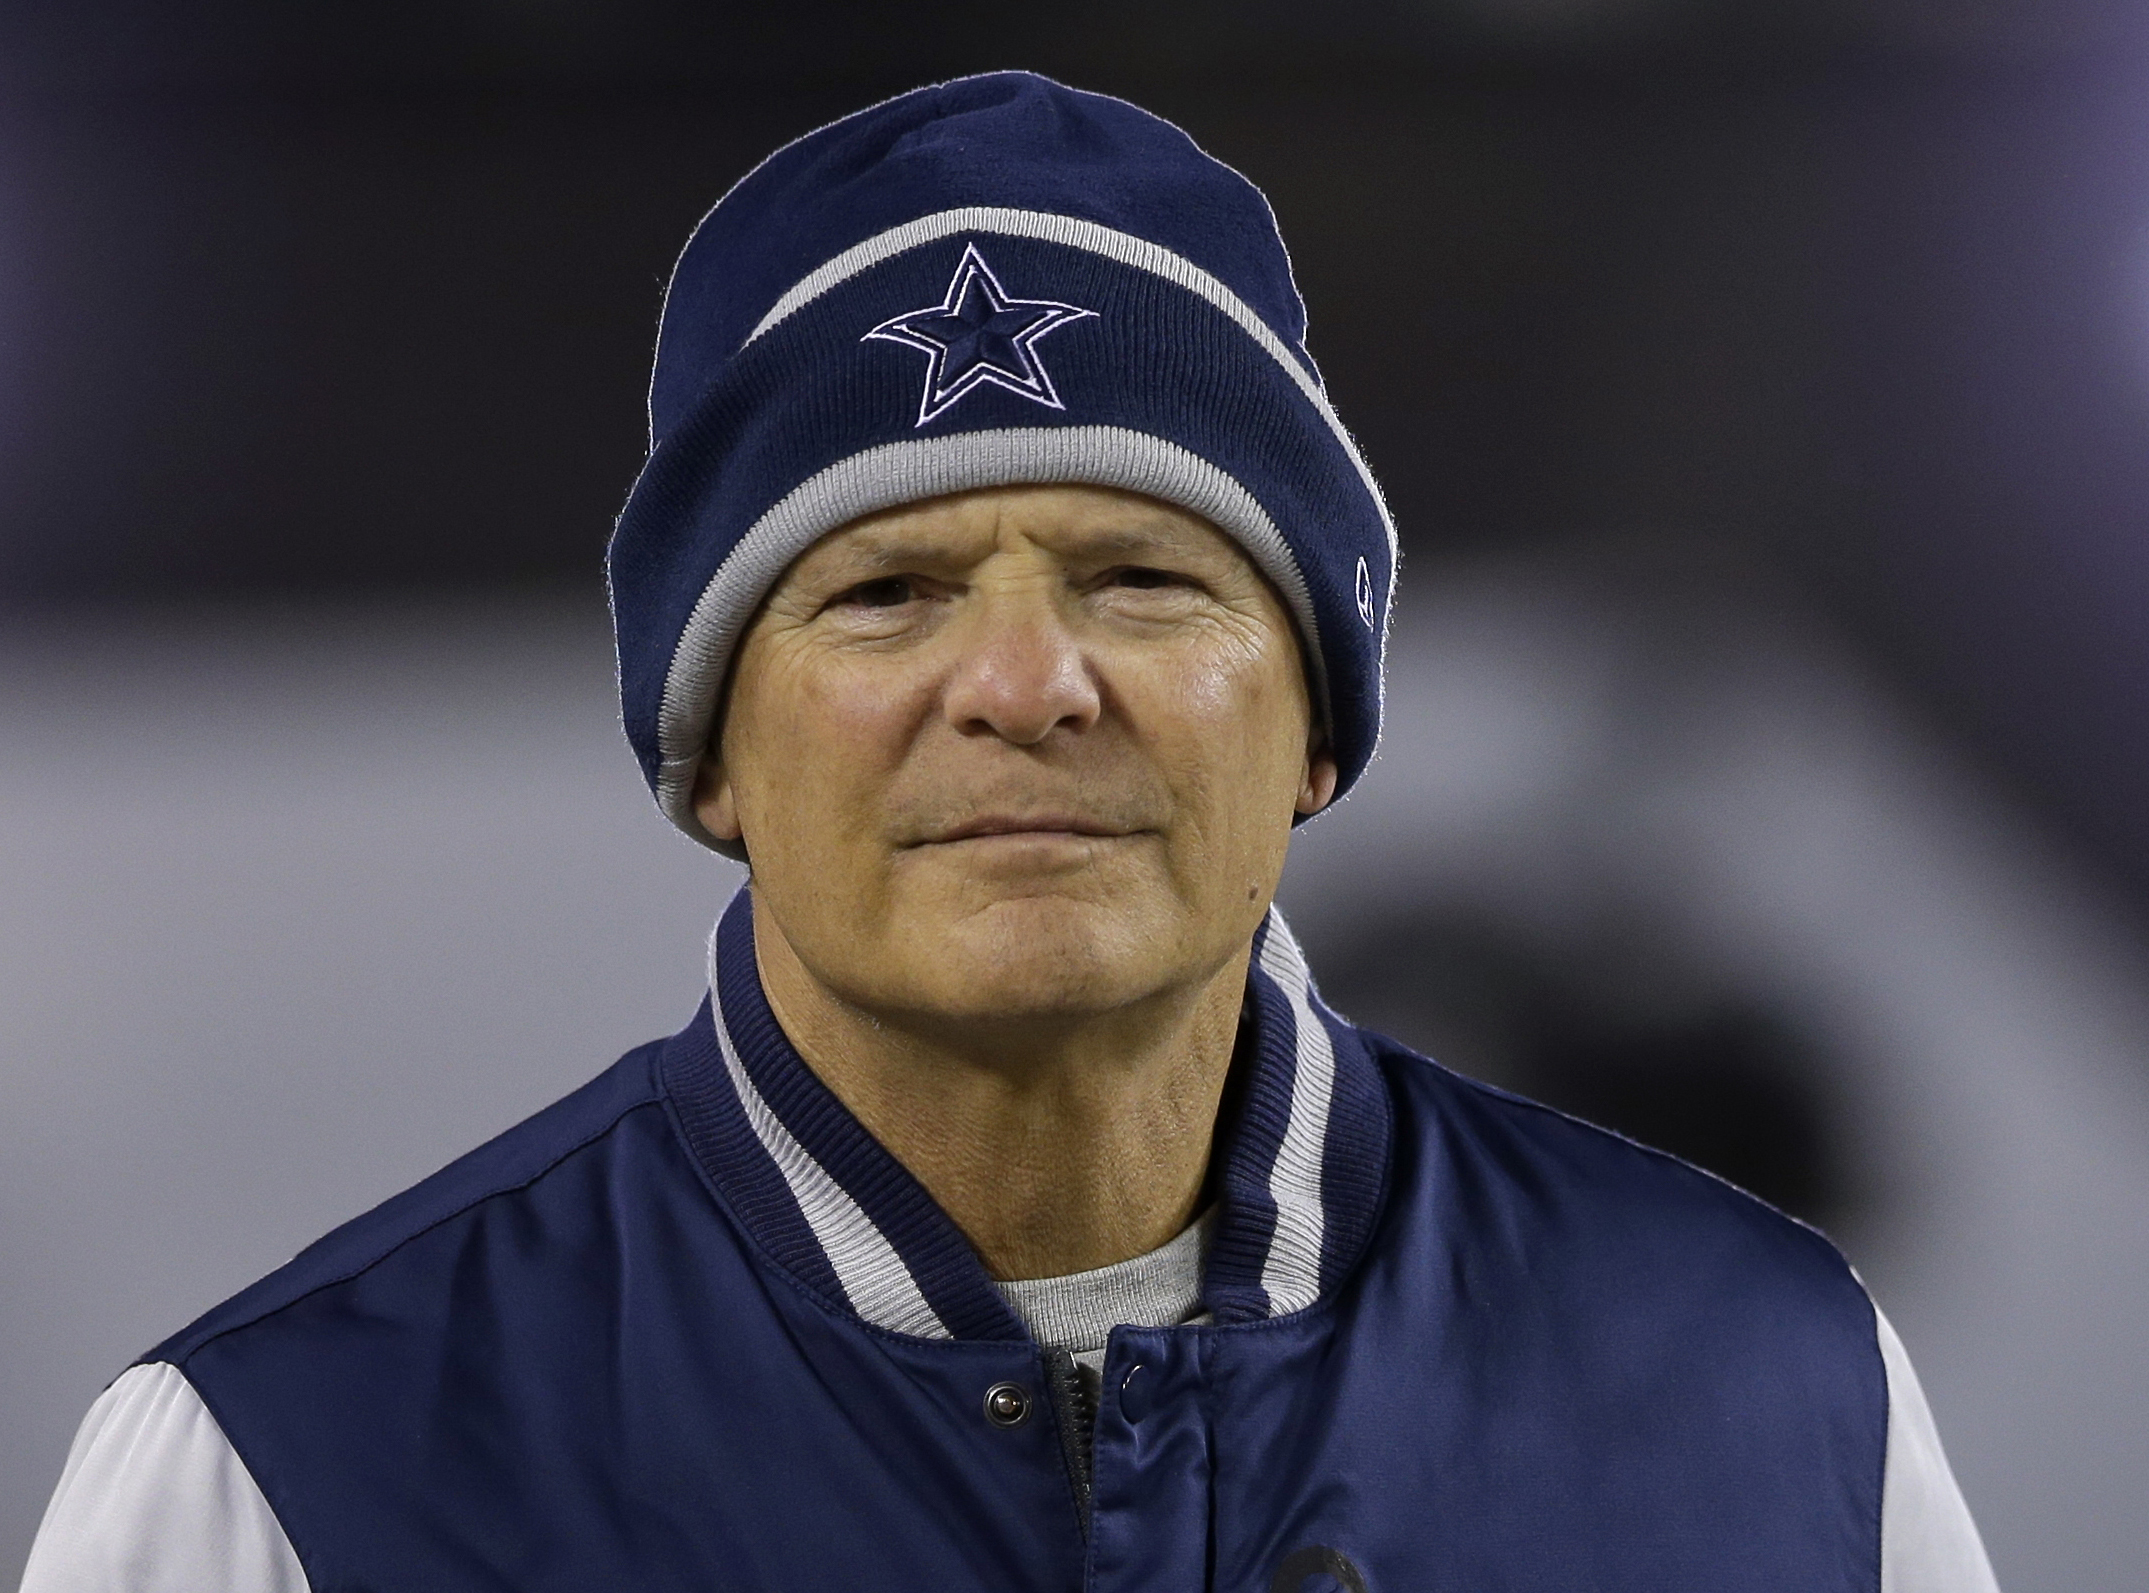 Cowboys Blog - Why Cowboys' Fans Should Panic, According to NFLN 1